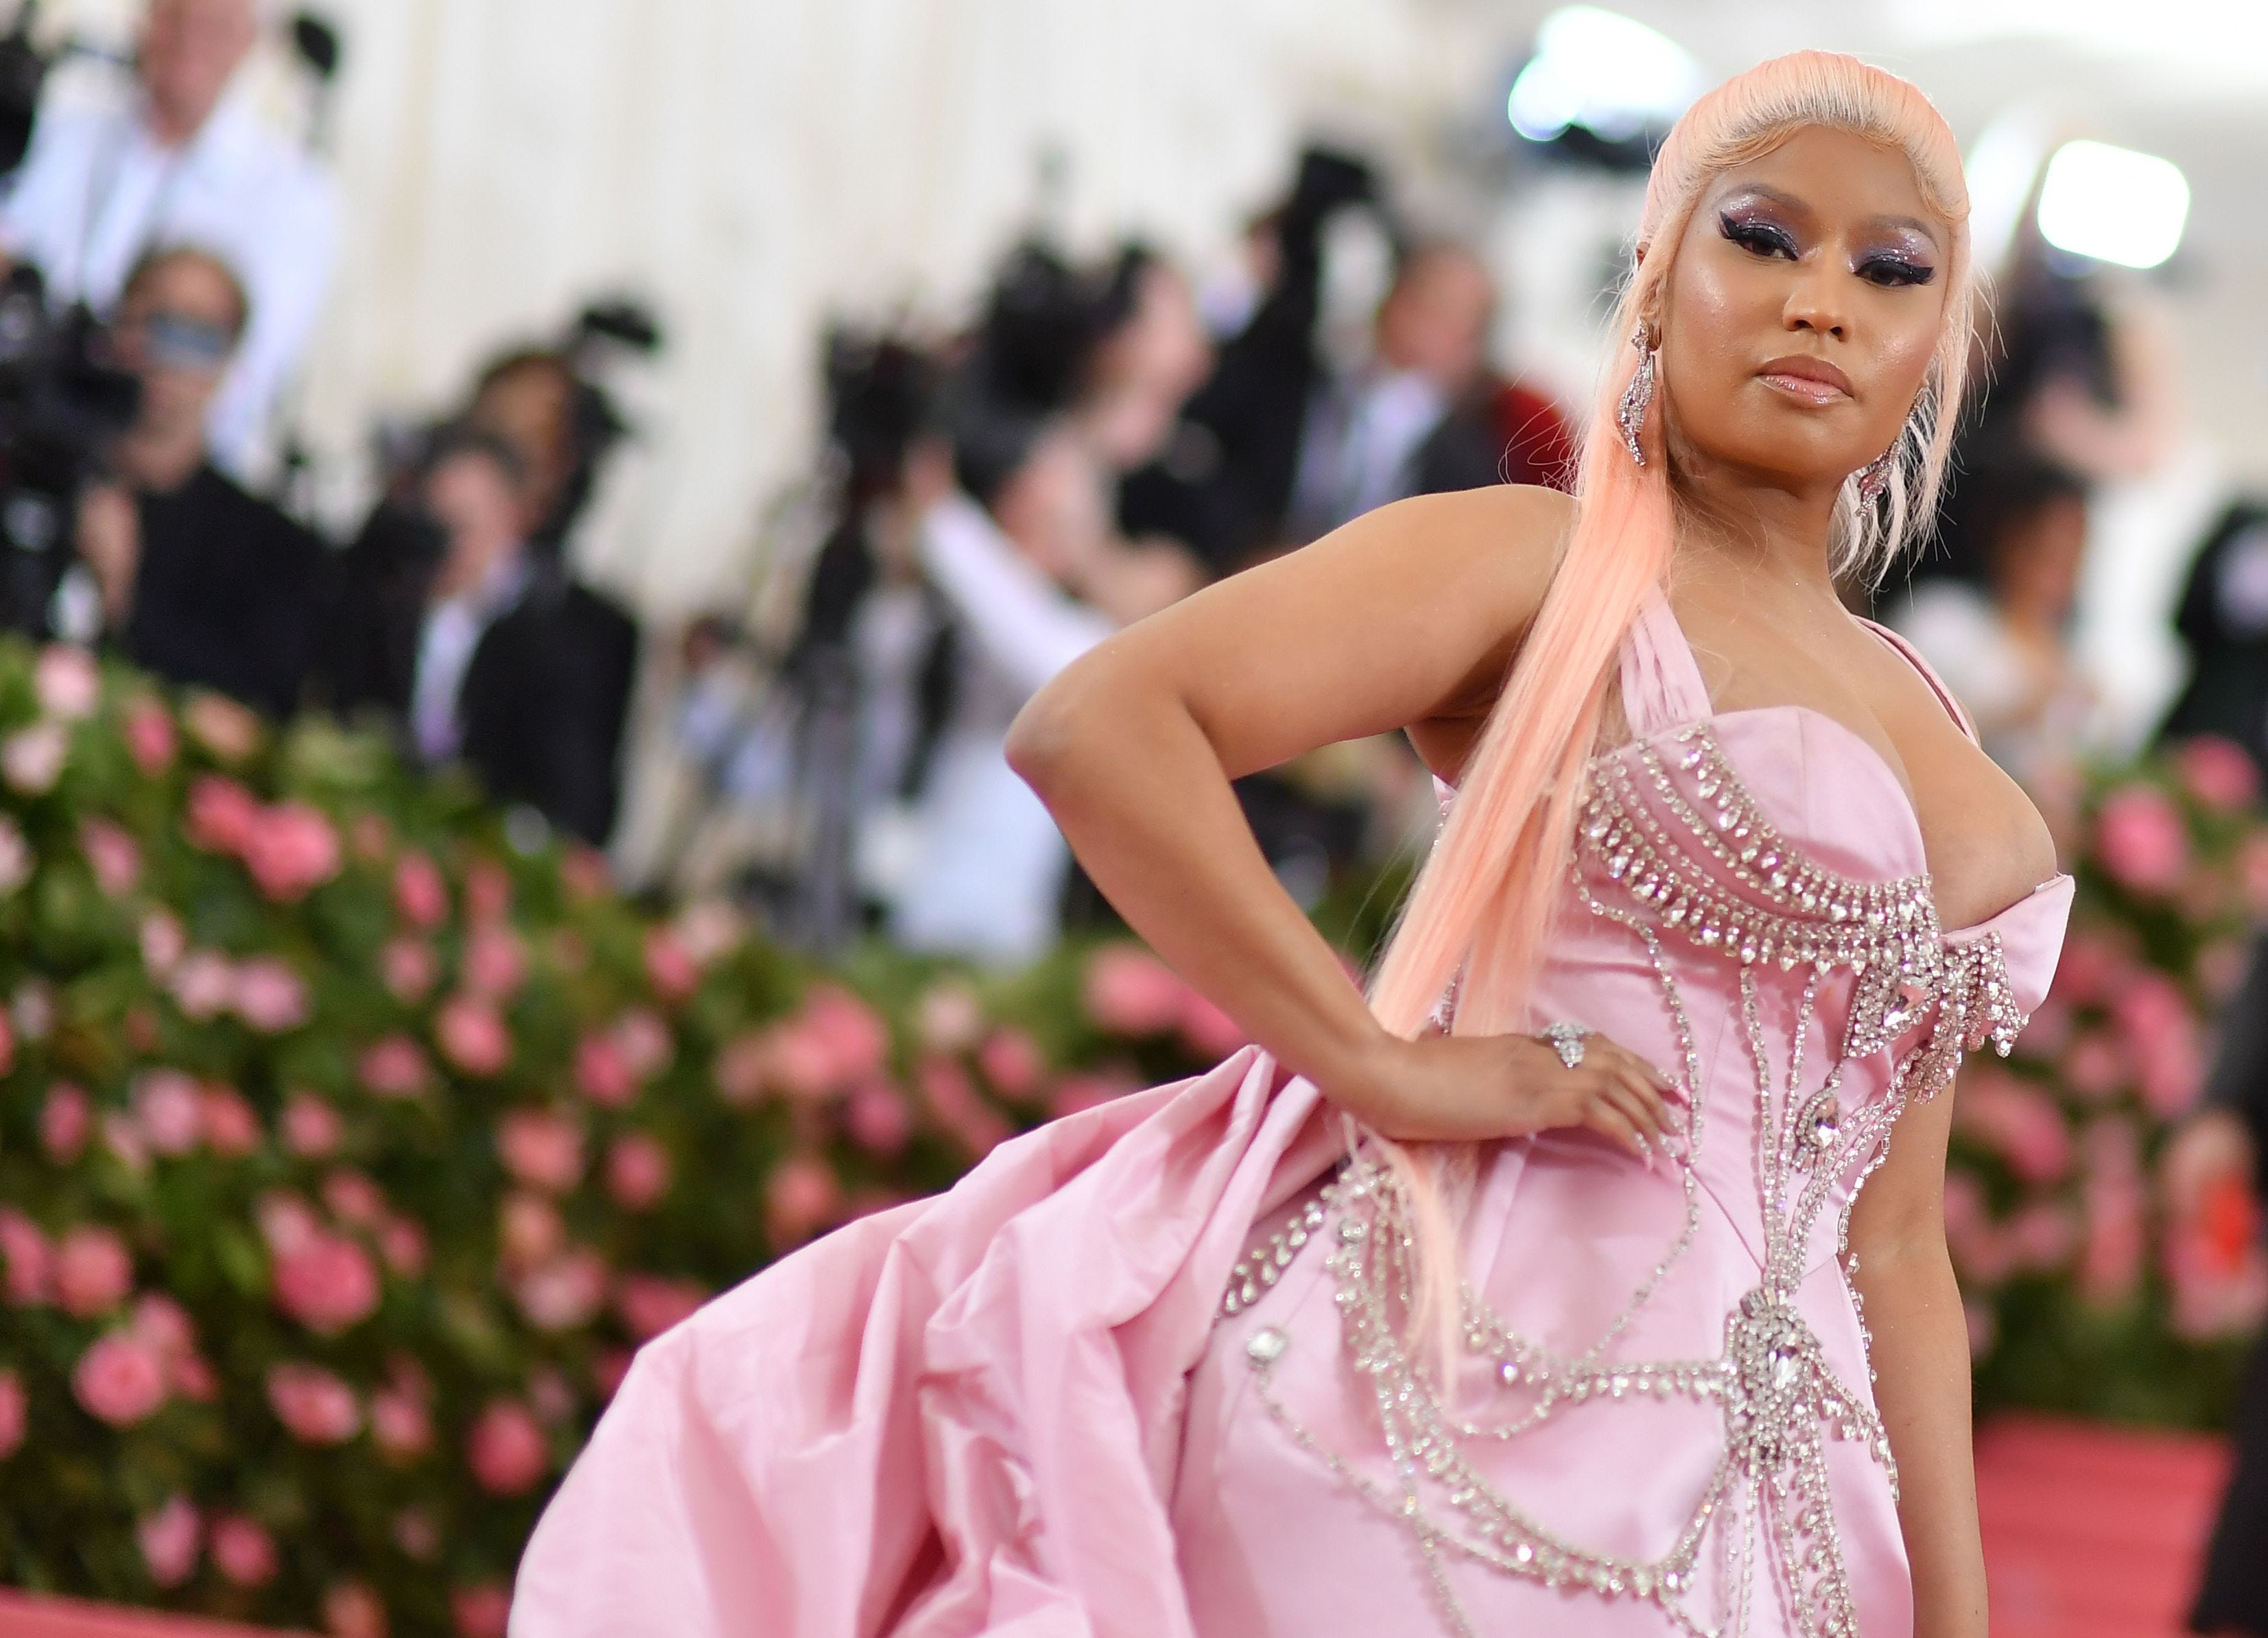 Nicki Minaj marries Kenneth Petty after a year of dating The Clyde to ... photo